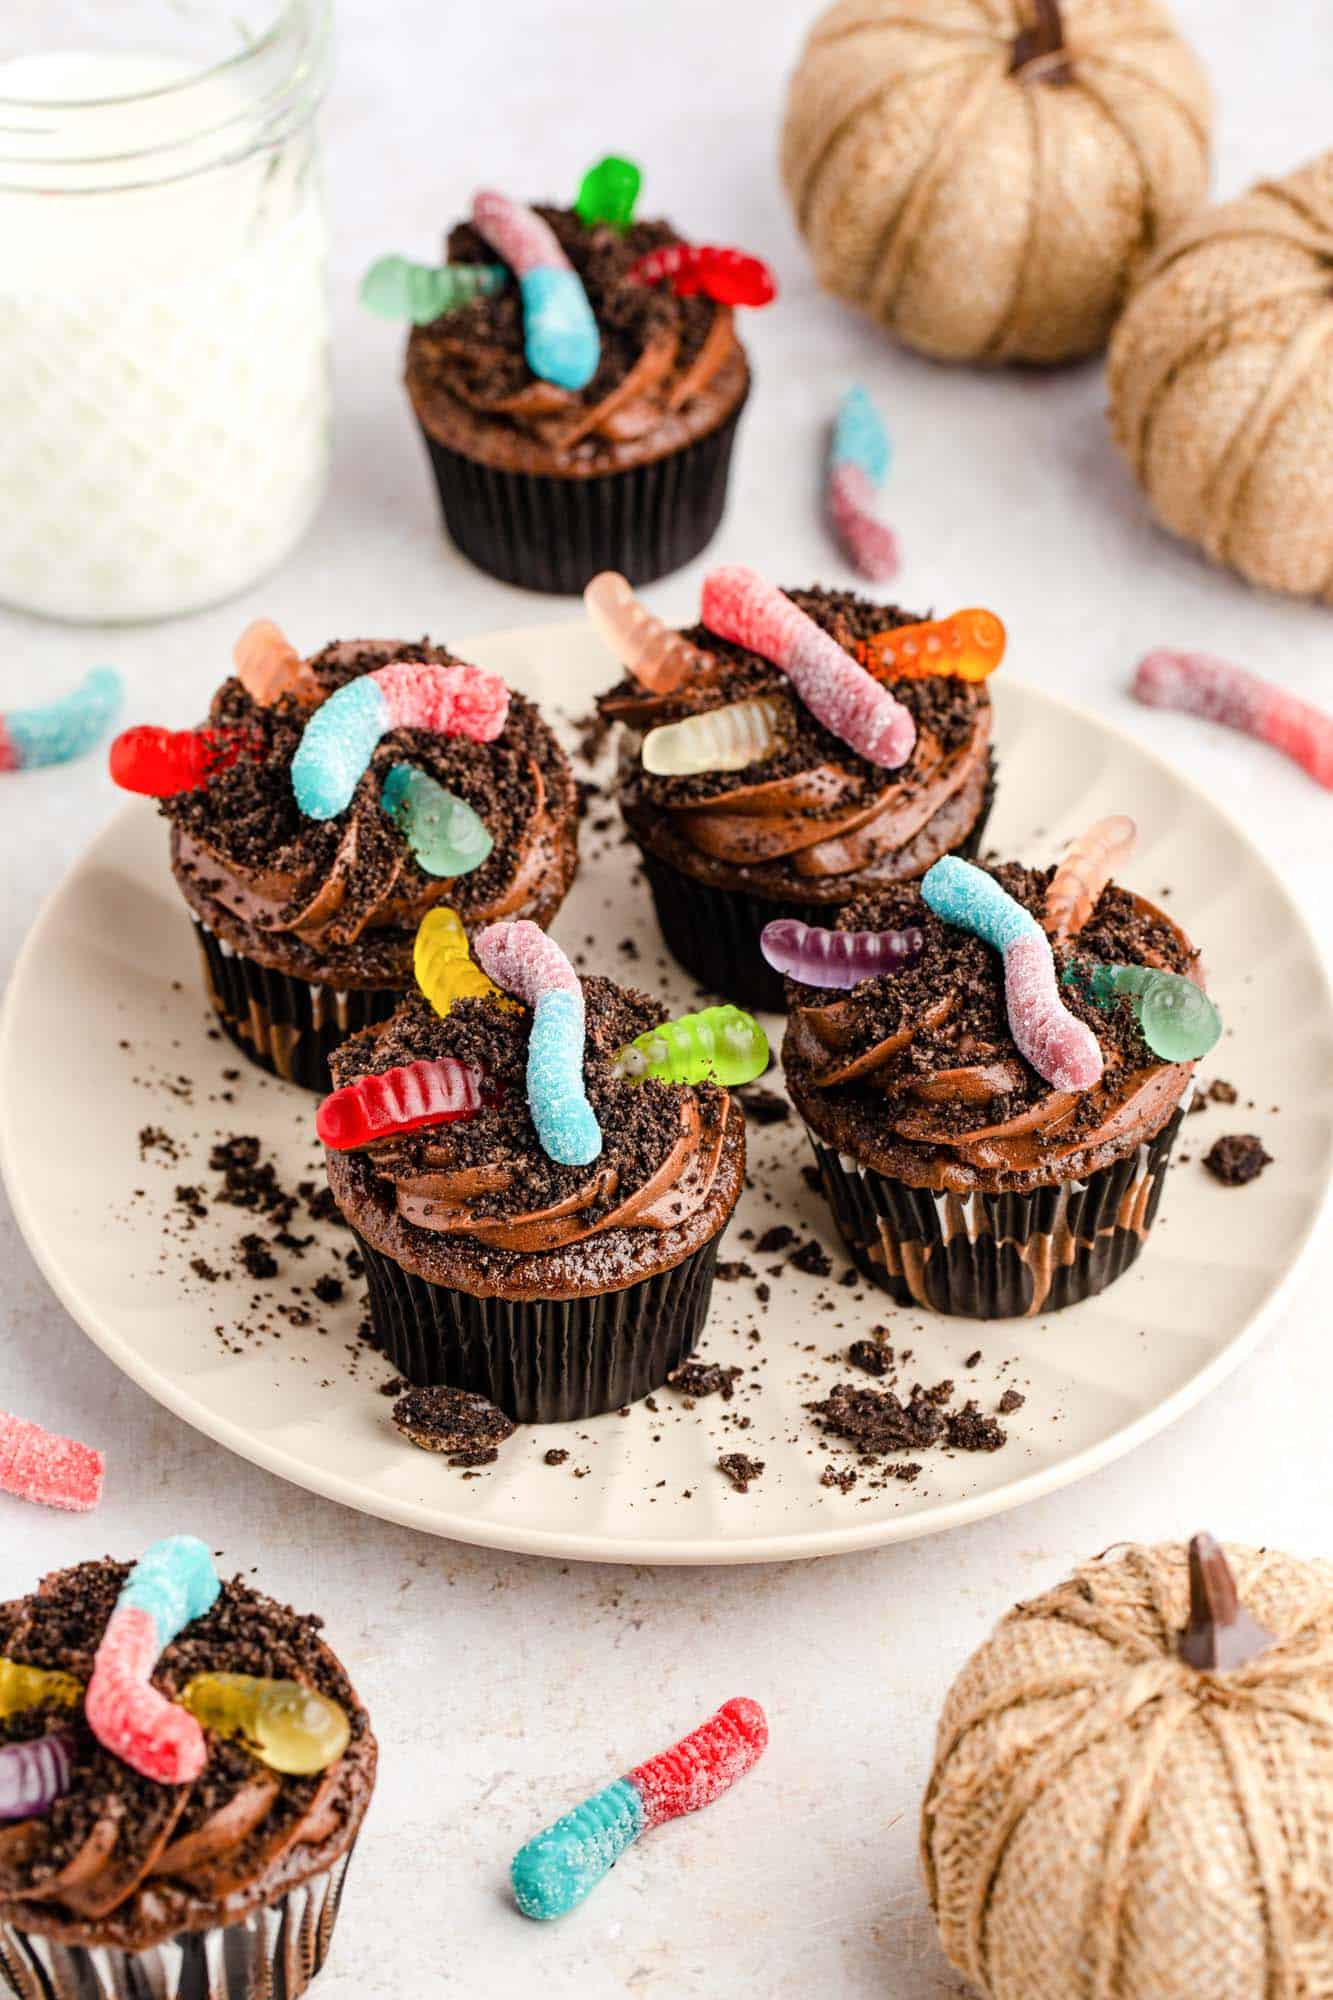 a plate holding four cupcakes with another cupcake on the table behind it. The cupcakes are chocolate with chocolate frosting, topped with oreo crumbs and candy gummy worms in multiple colors